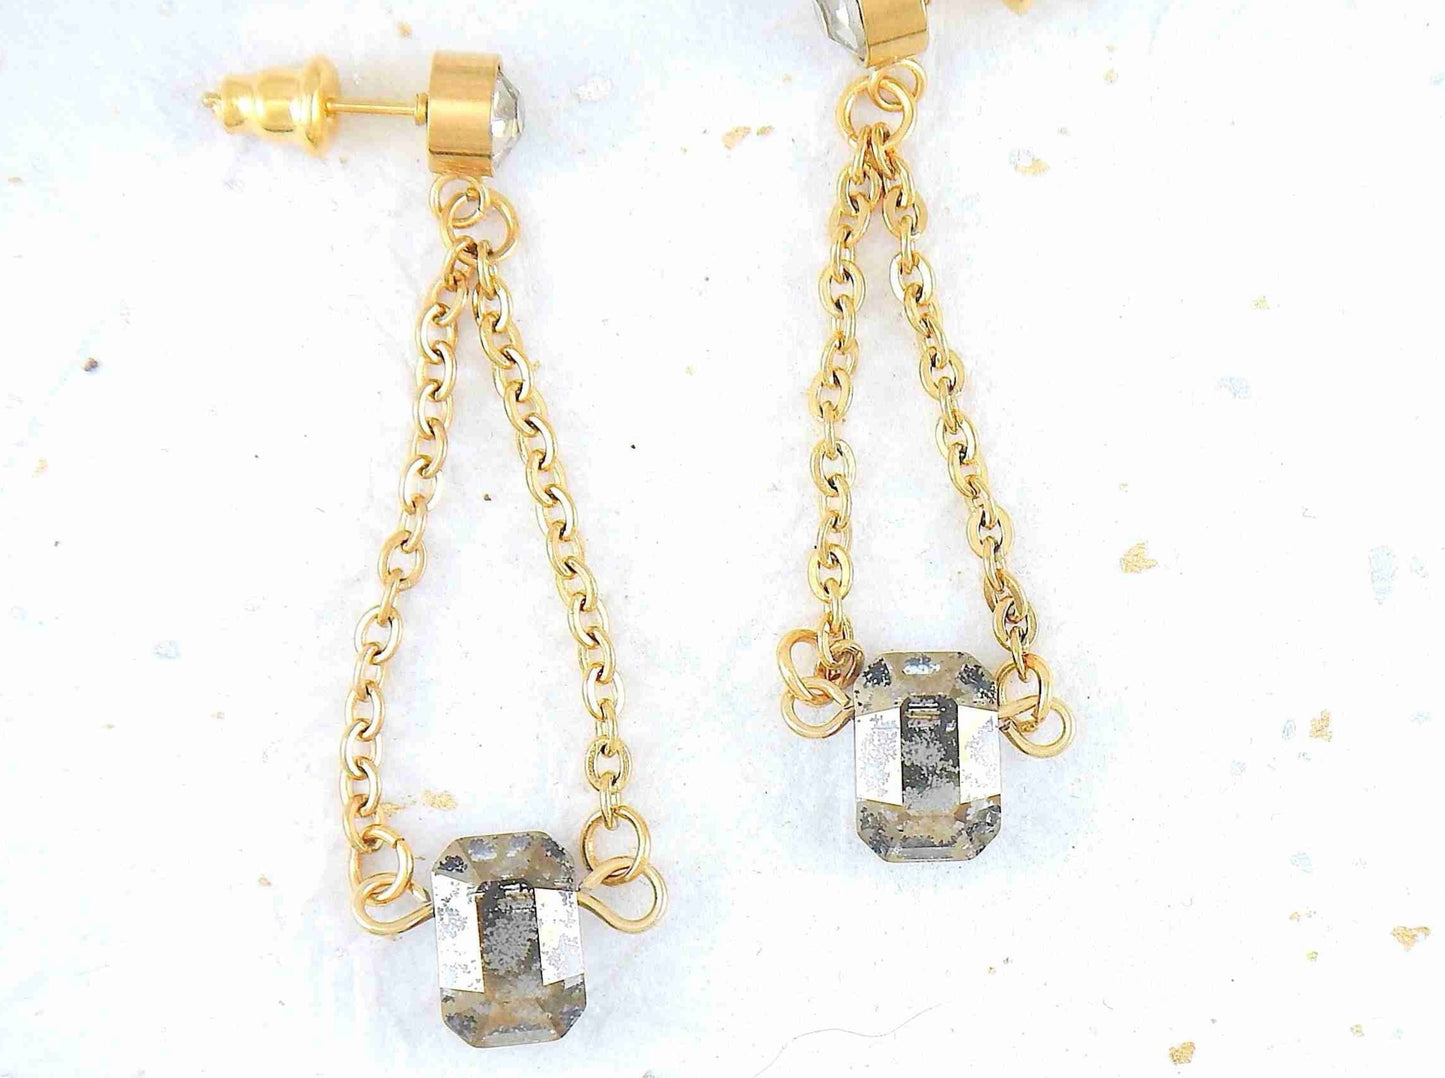 Long earrings with 10mm Gold Patina patterned Swarovski crystal pendulums, gold-toned stainless steel chain and crystal posts